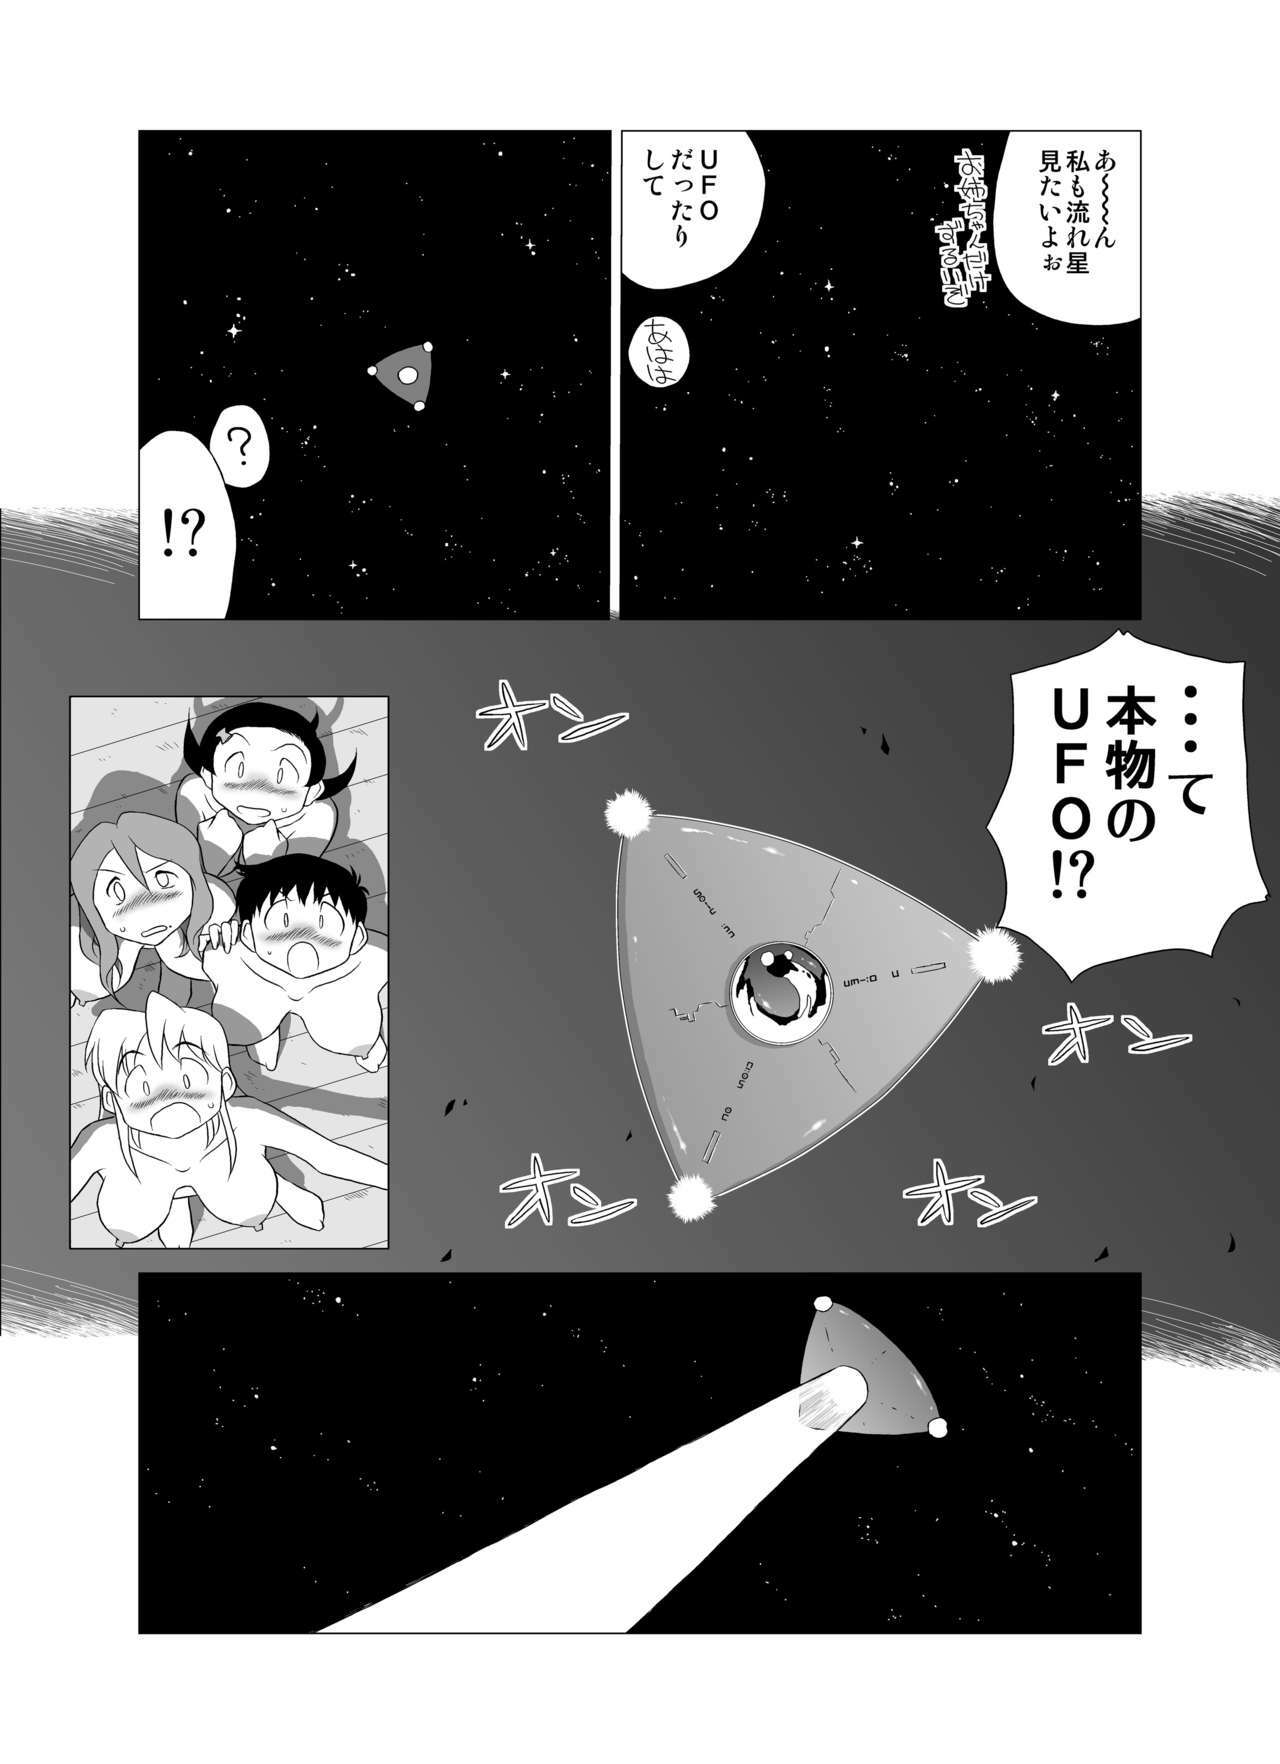 [GT-Wanko] The Days of F Vol. 4 page 32 full